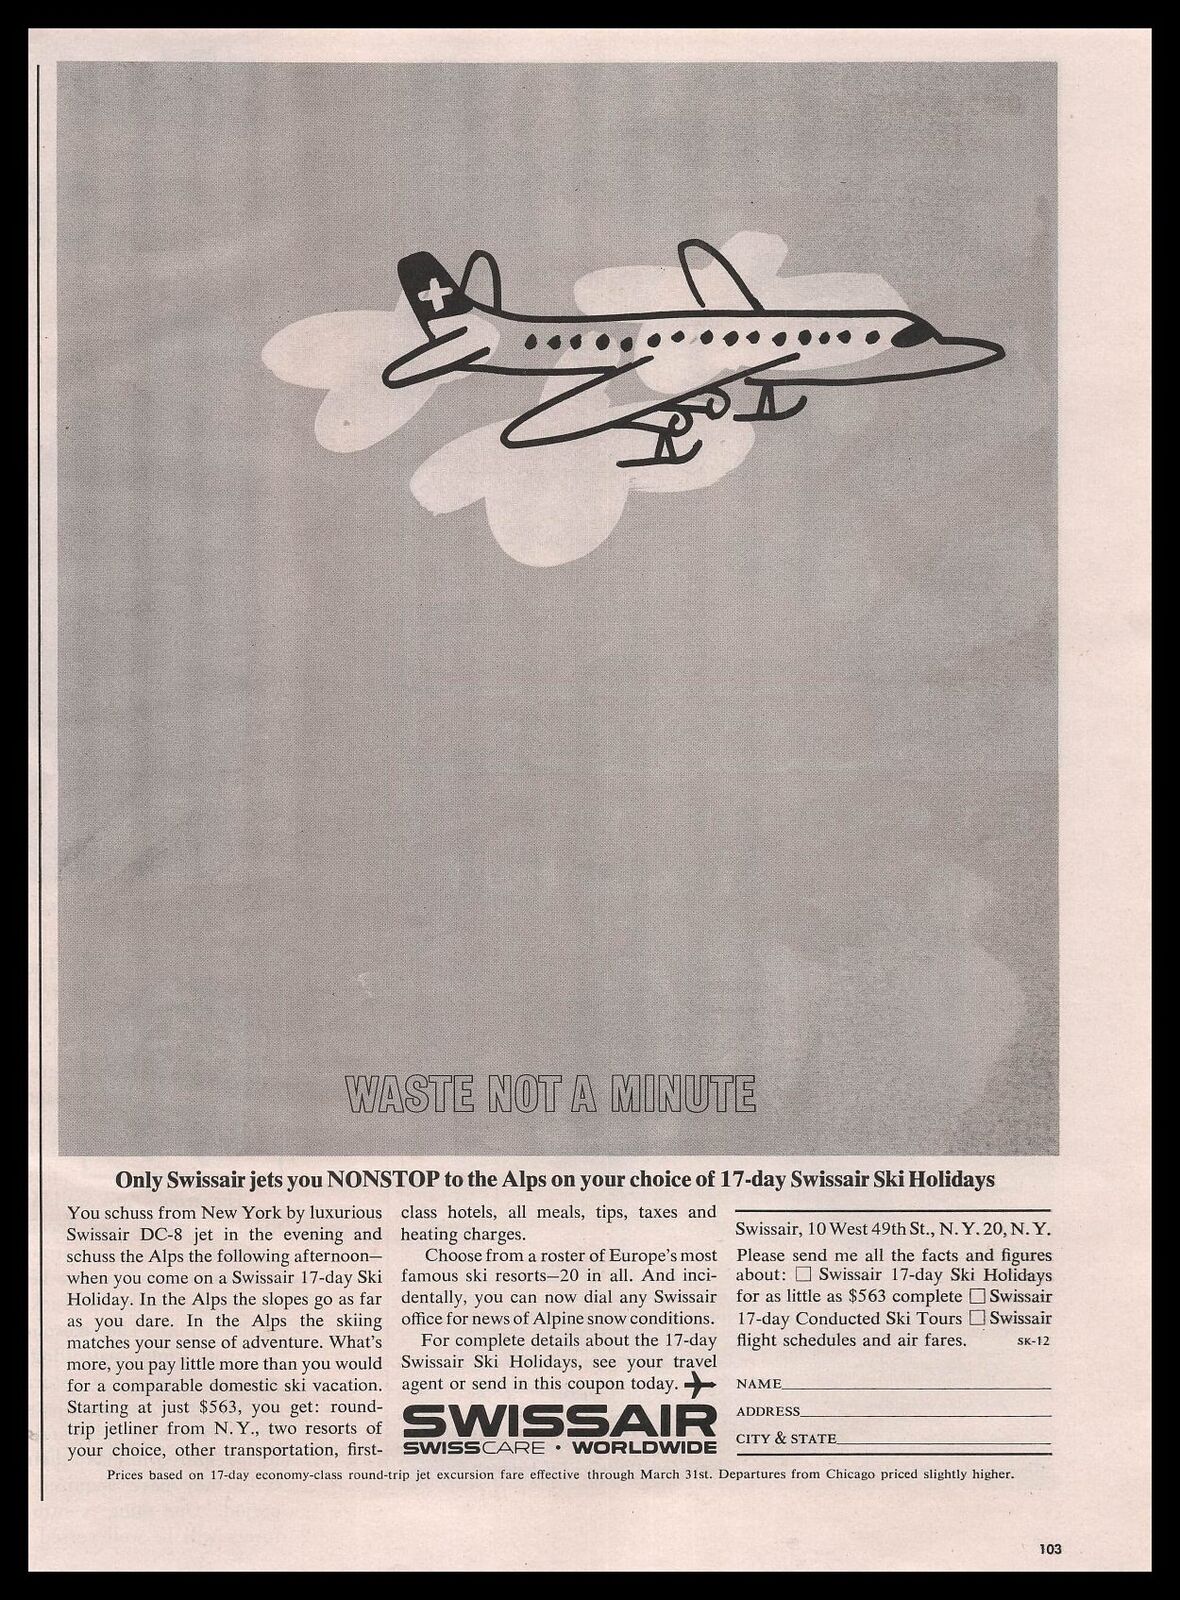 1962 Swissair Jet Nonstop To The Alps Waste Not A Minute Cartoon Print Ad